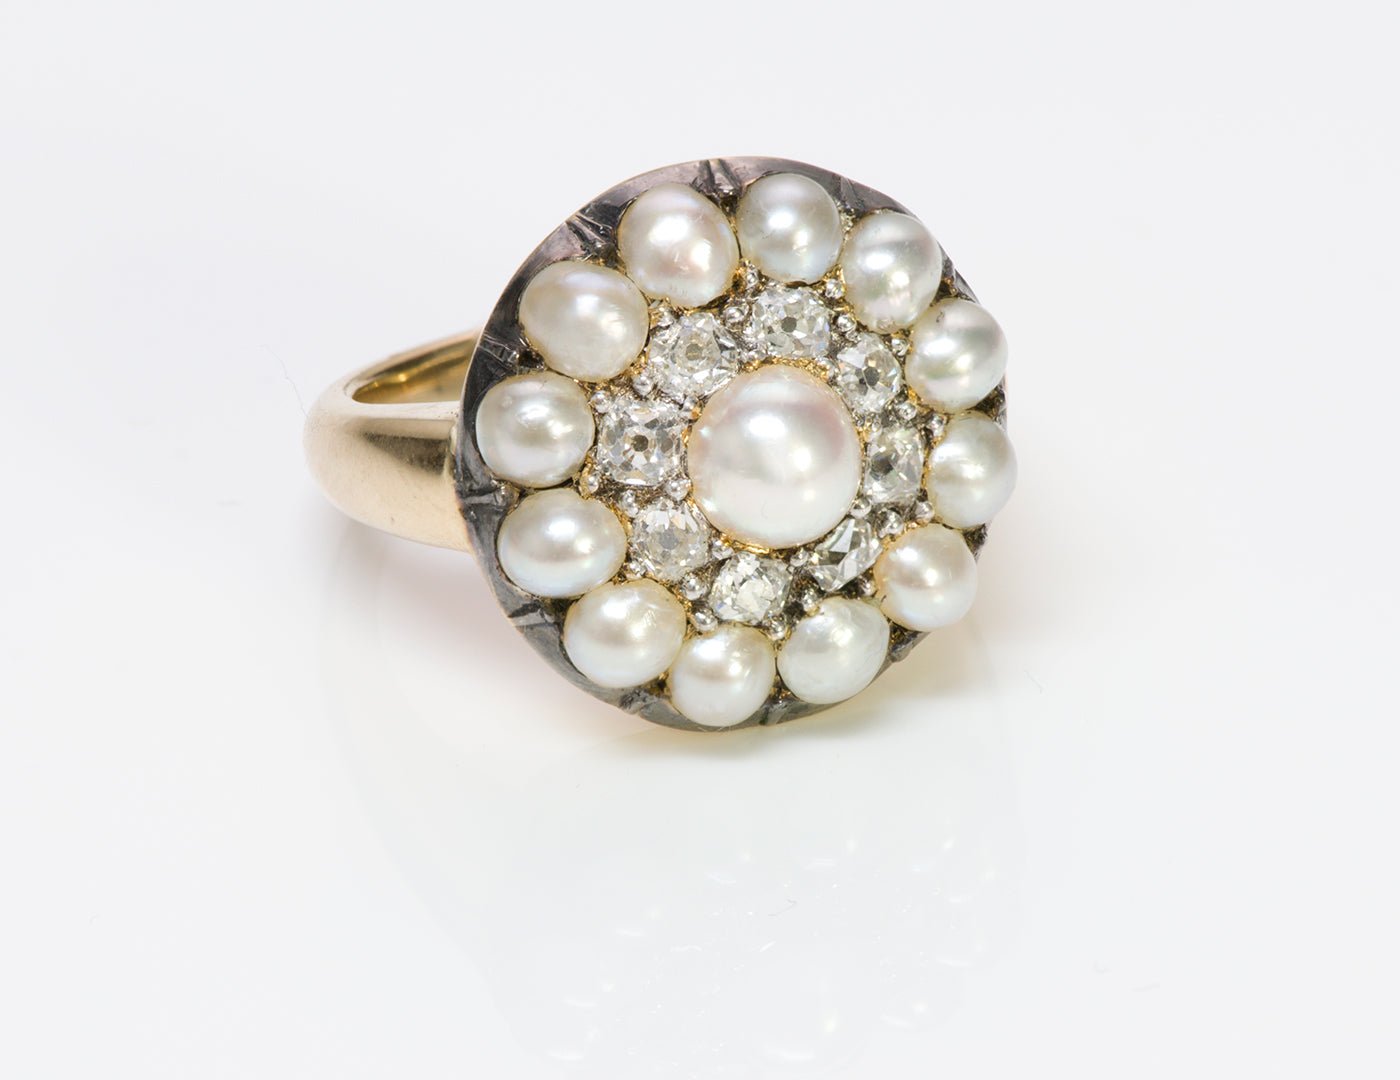 Antique 18K Gold Cluster Natural Pearl Diamond Ring